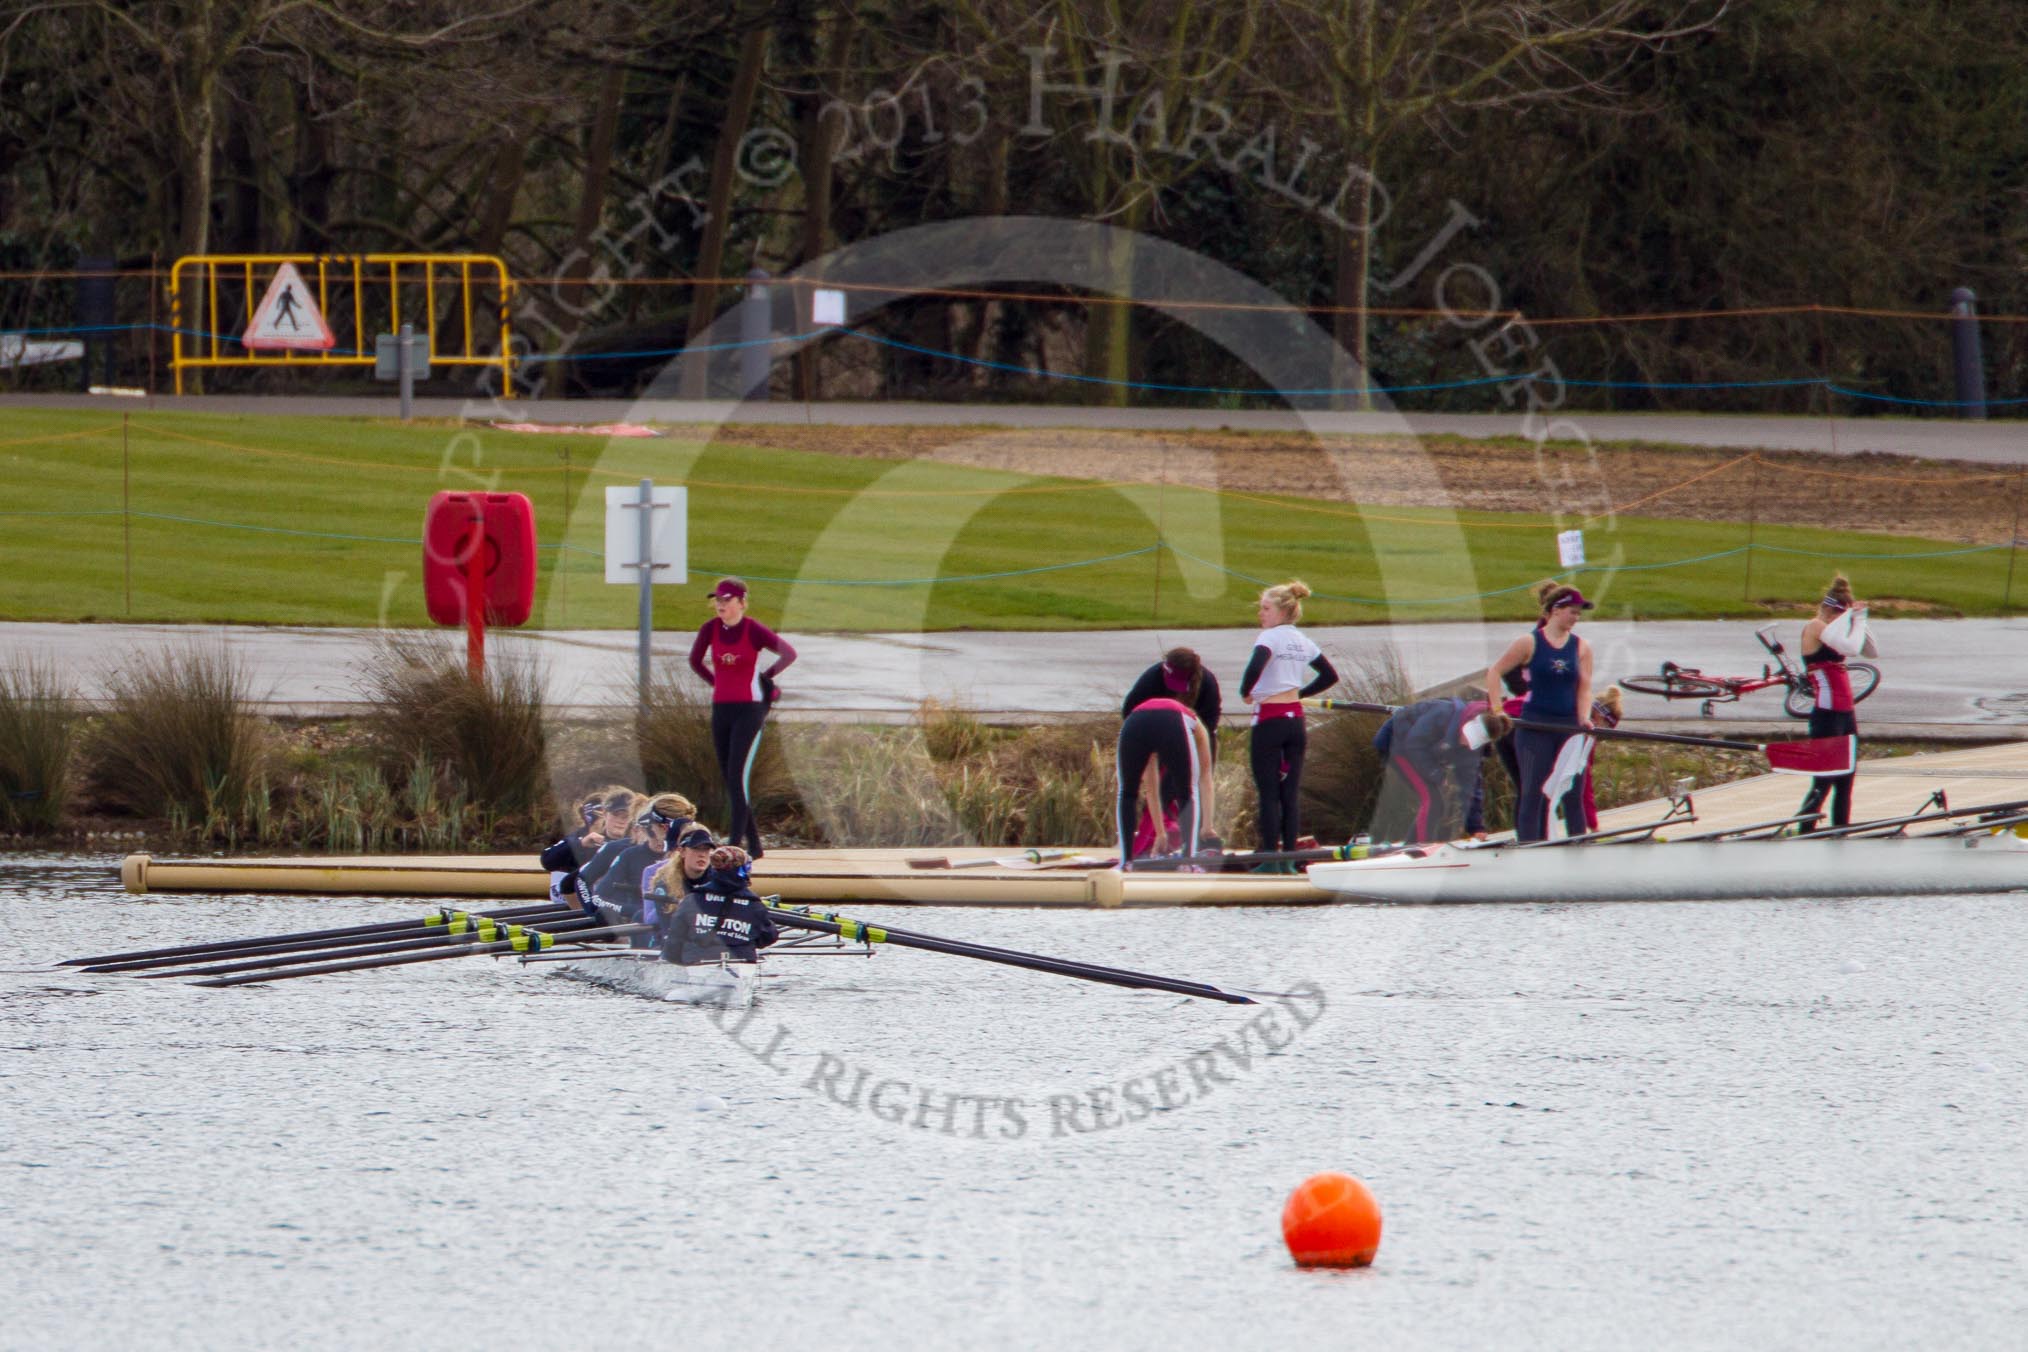 The Boat Race season 2013 - fixture OUWBC vs Olympians: The OUWBC reserve boat Osiris returning to a pontoon an Dorney Lake after the training session whilst the Olympians are carrying their boat away..
Dorney Lake,
Dorney, Windsor,
Buckinghamshire,
United Kingdom,
on 16 March 2013 at 12:32, image #331